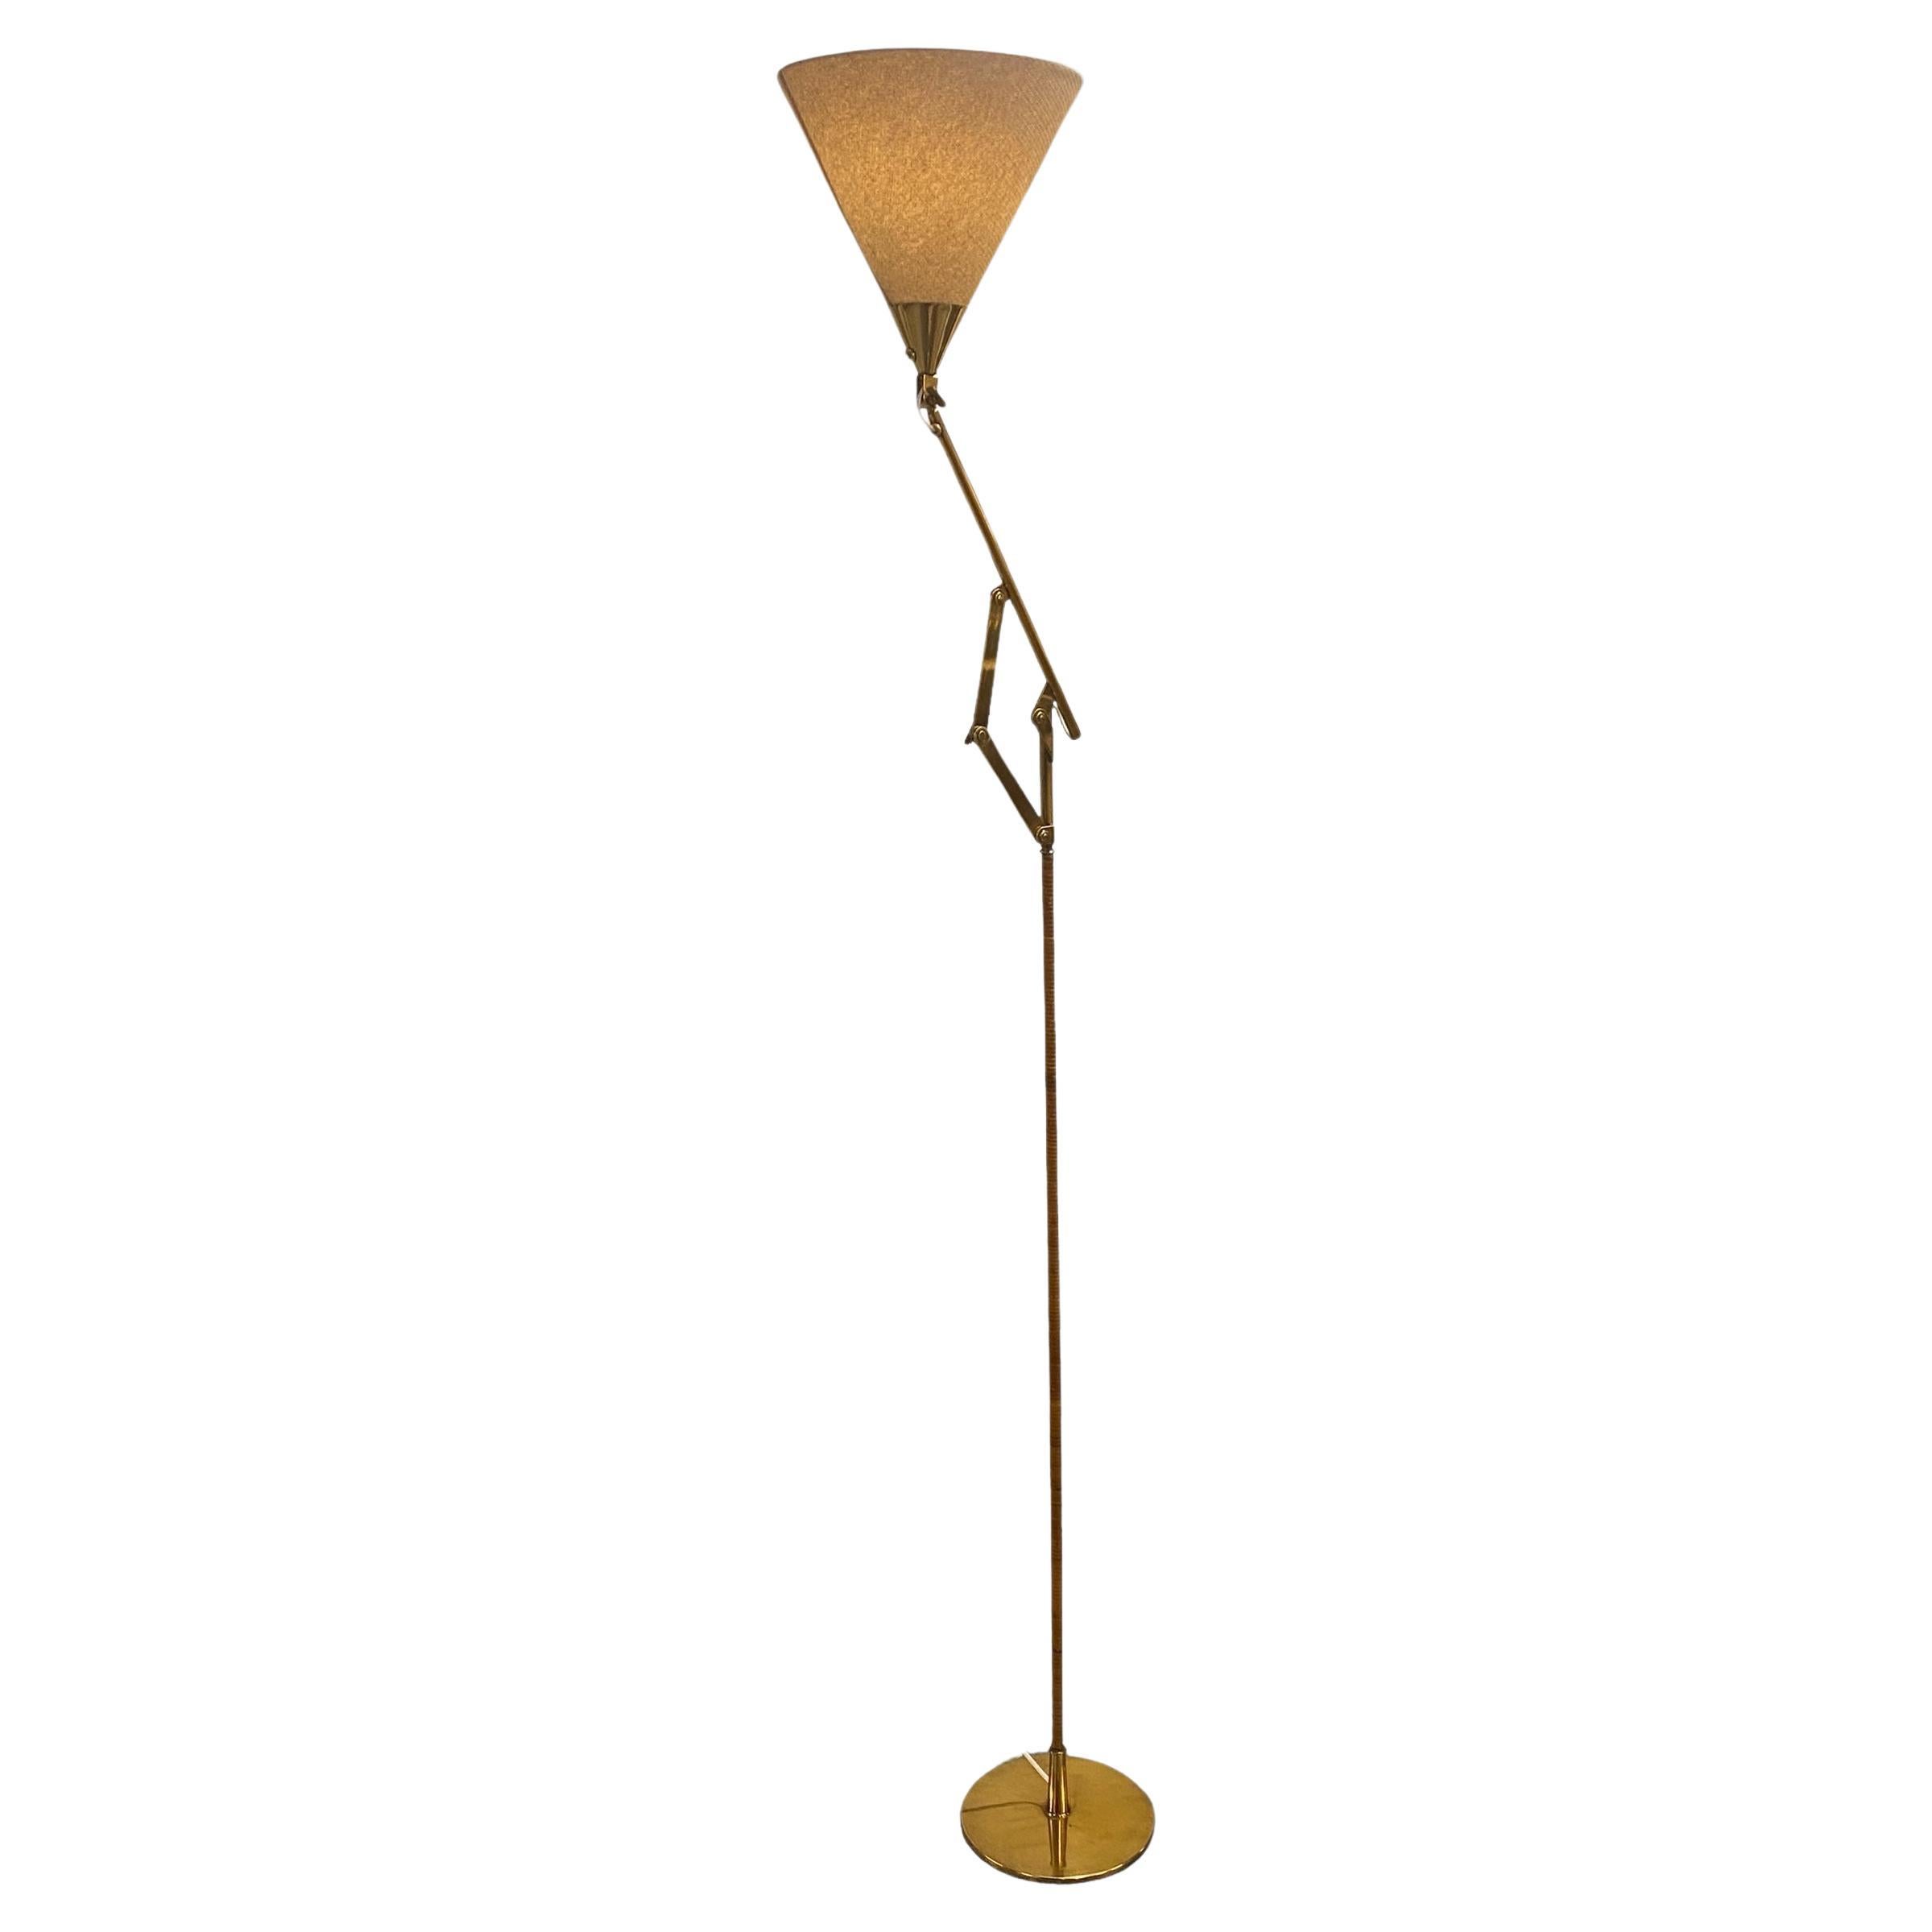 A brass floor lamp model 9605 designed by Paavo Tynell and manufactured by Taito Oy in Finland in the 1950s. This is one of the rarest Paavo Tynell floor lamps, for it is not seen often. Featuring the usual rattan stem, and an adjustable mechanism